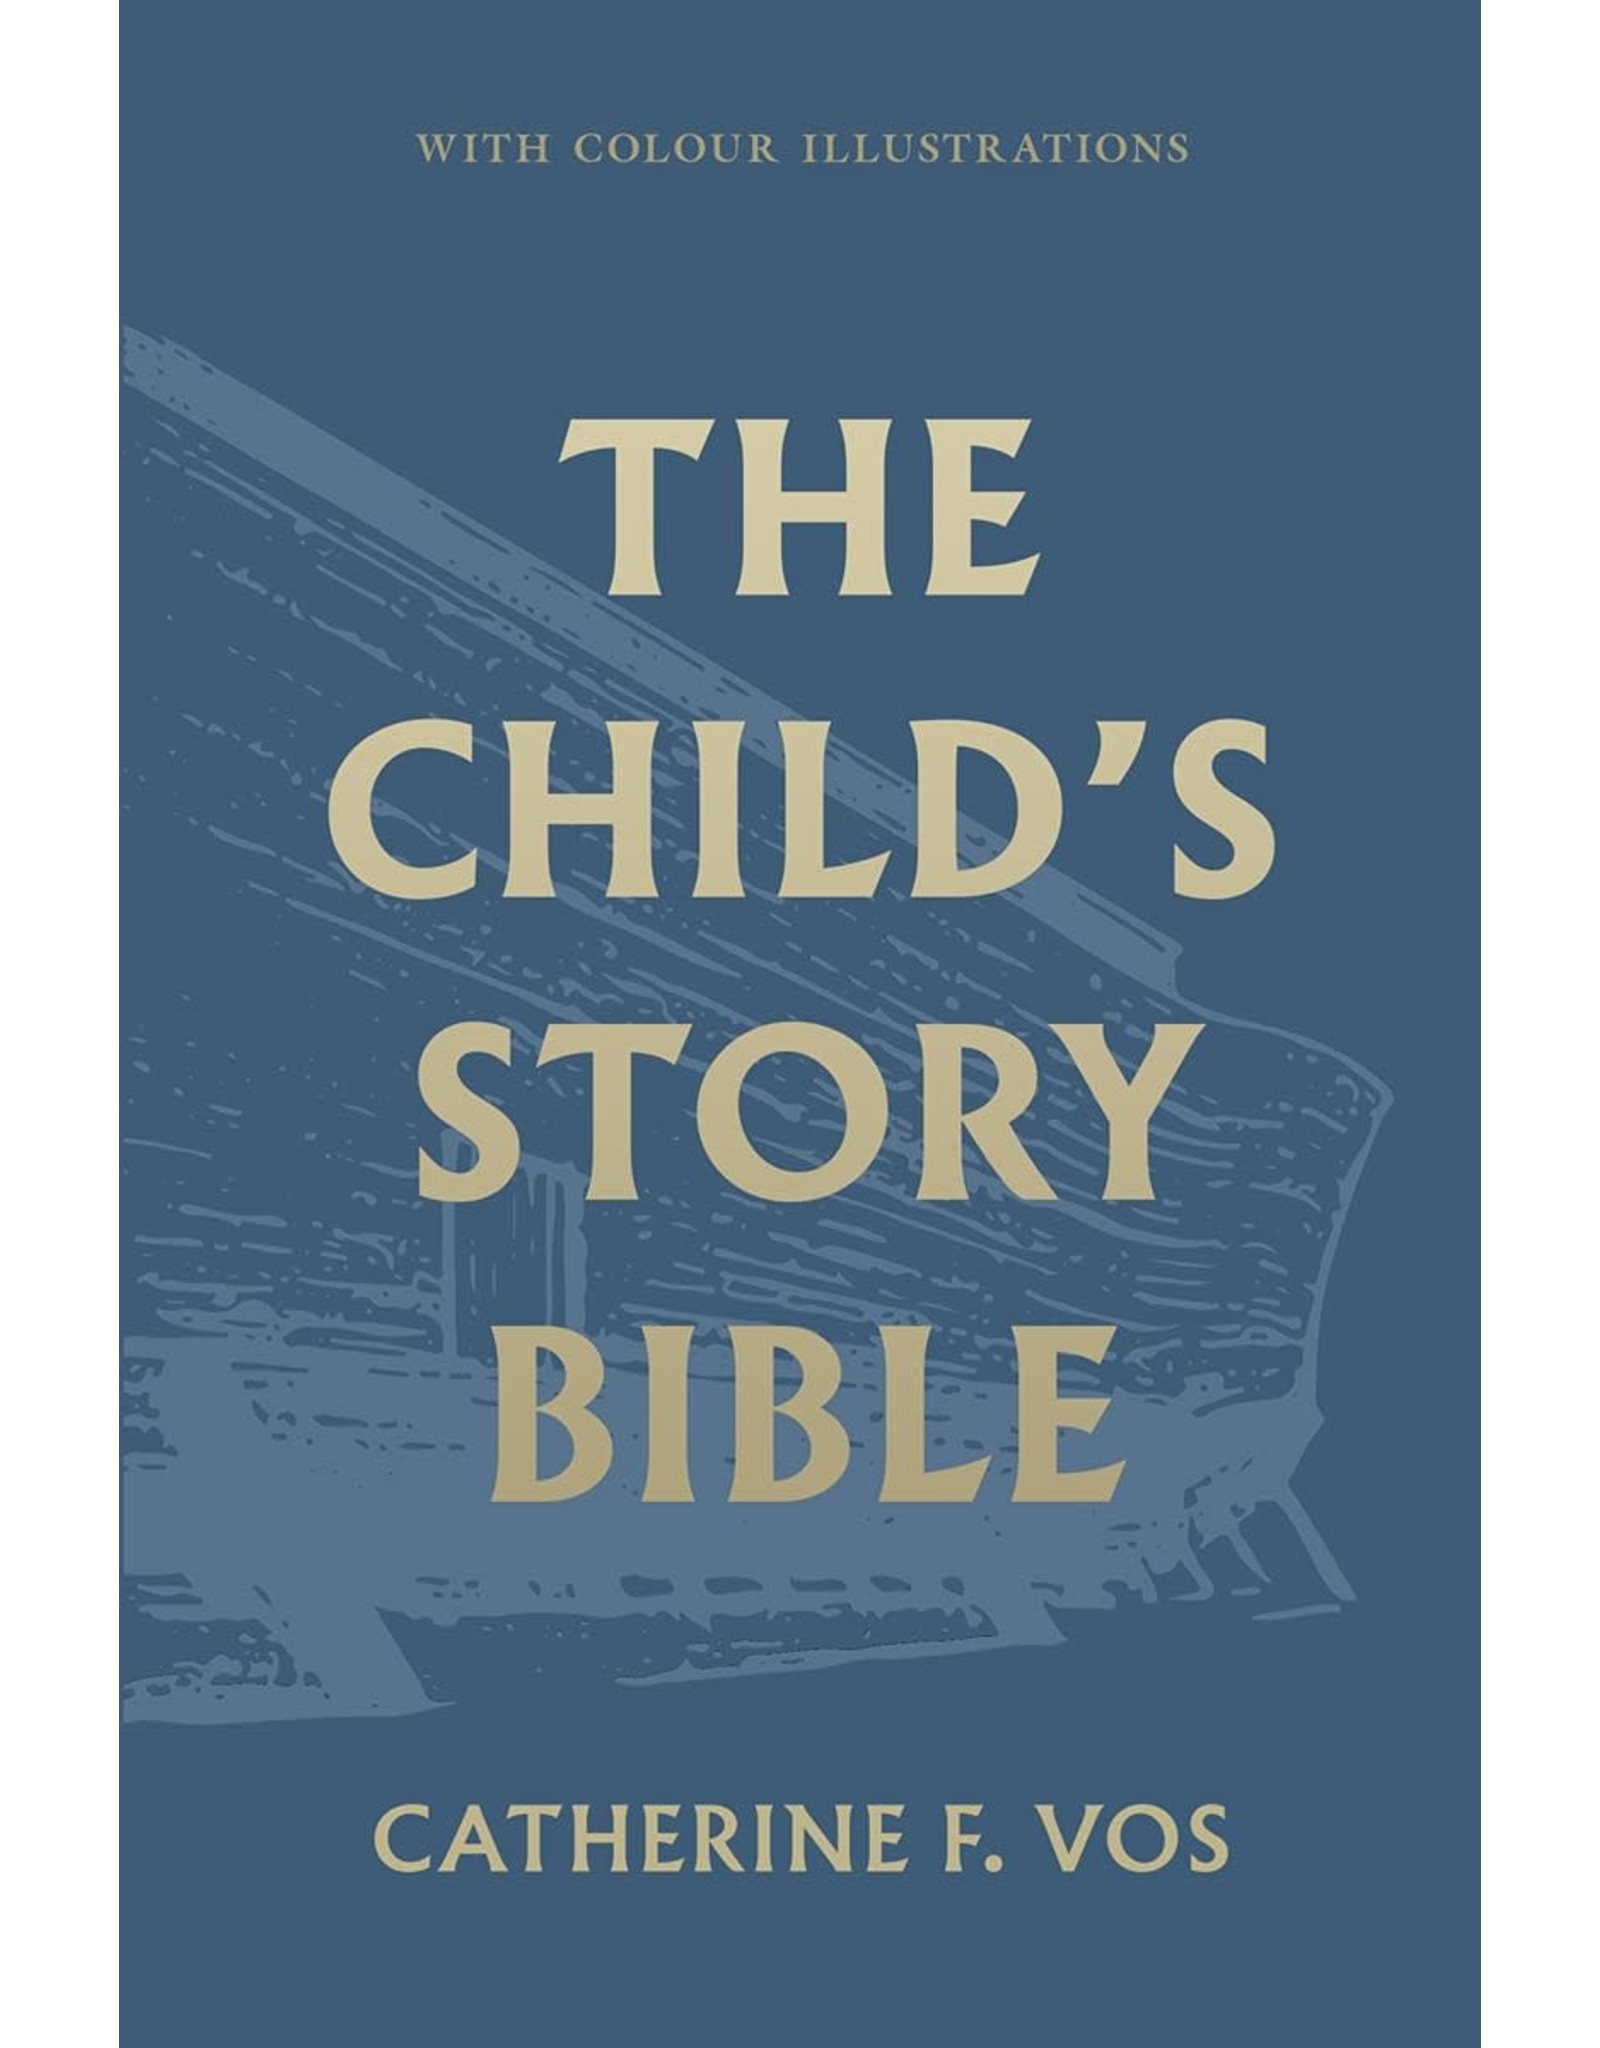 Banner of Truth The Child’s Story Bible